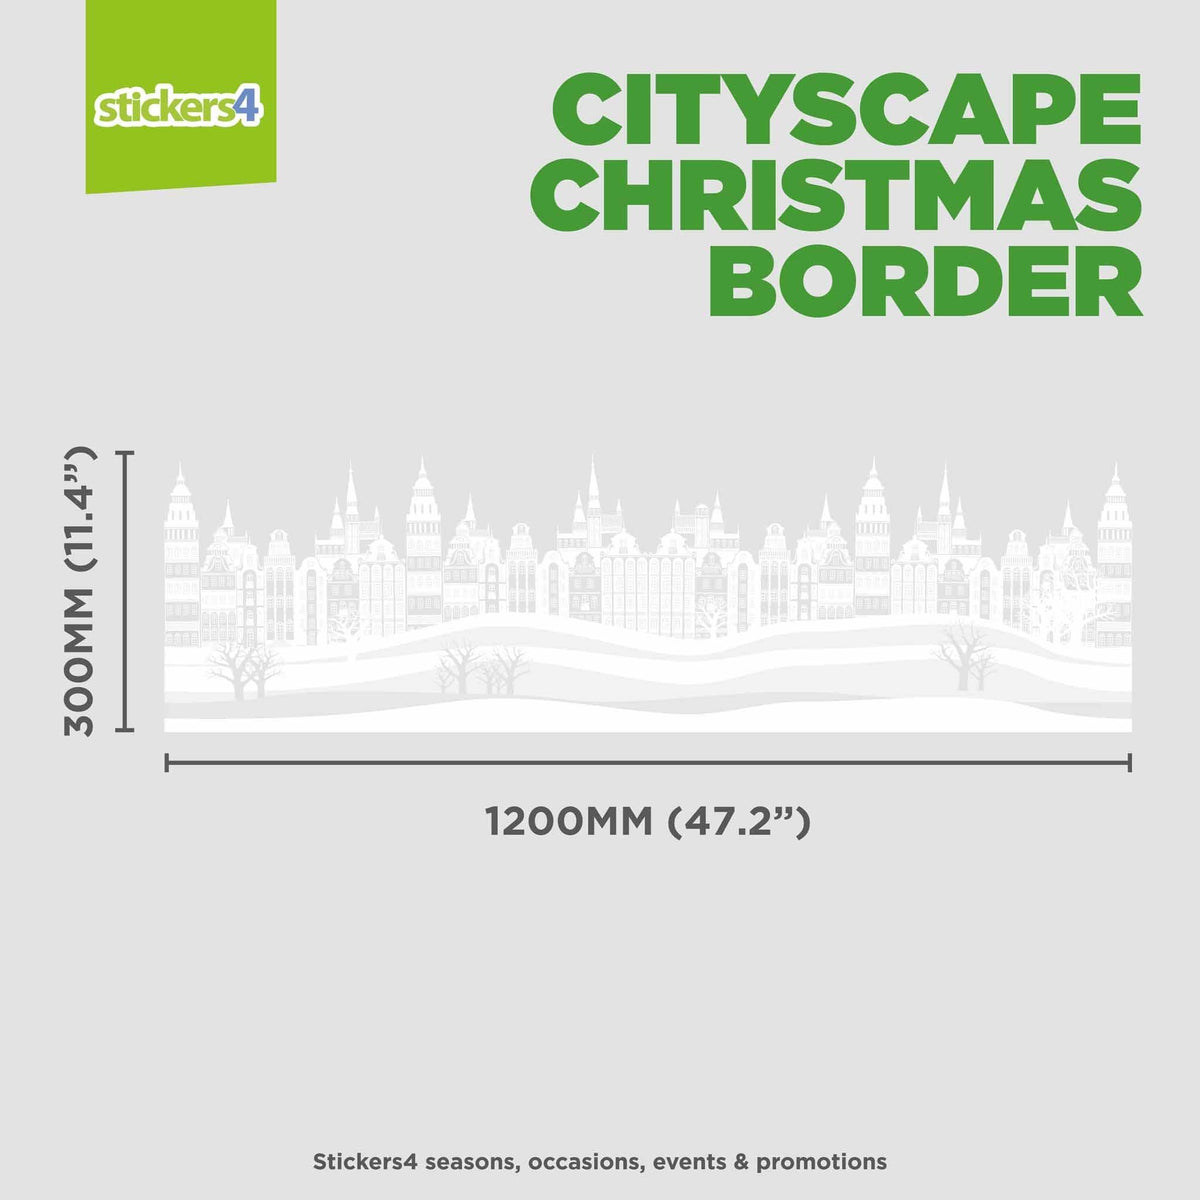 CityScape Window Cling Border (Large) Christmas Window Display